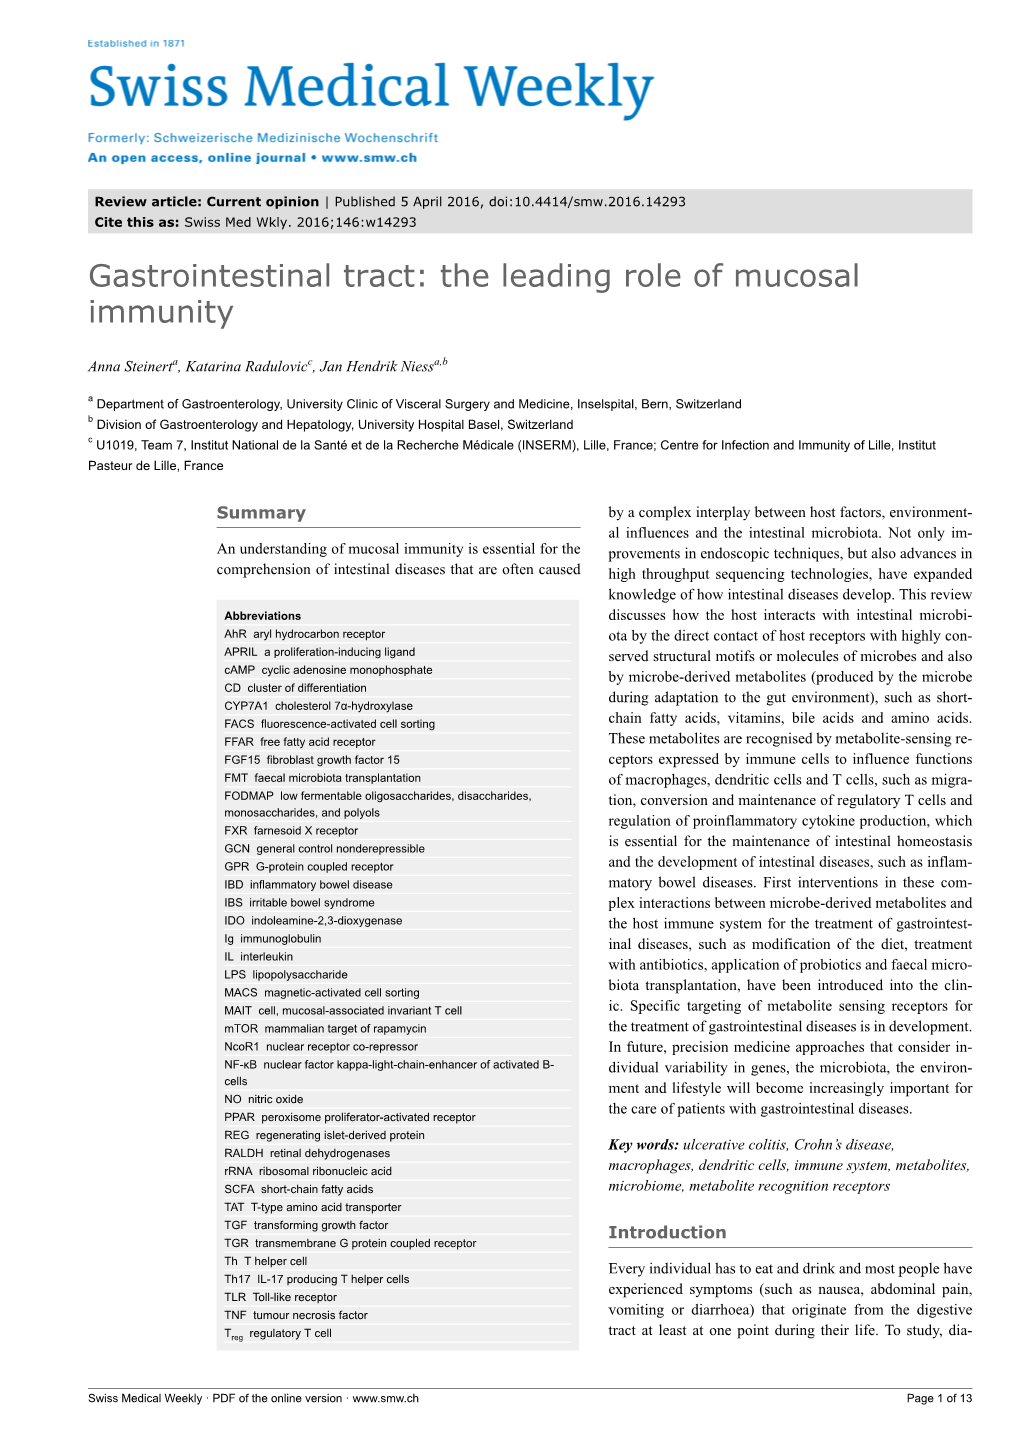 Gastro-Intestinal Tract: the Leading Role of Mucosal Immunity